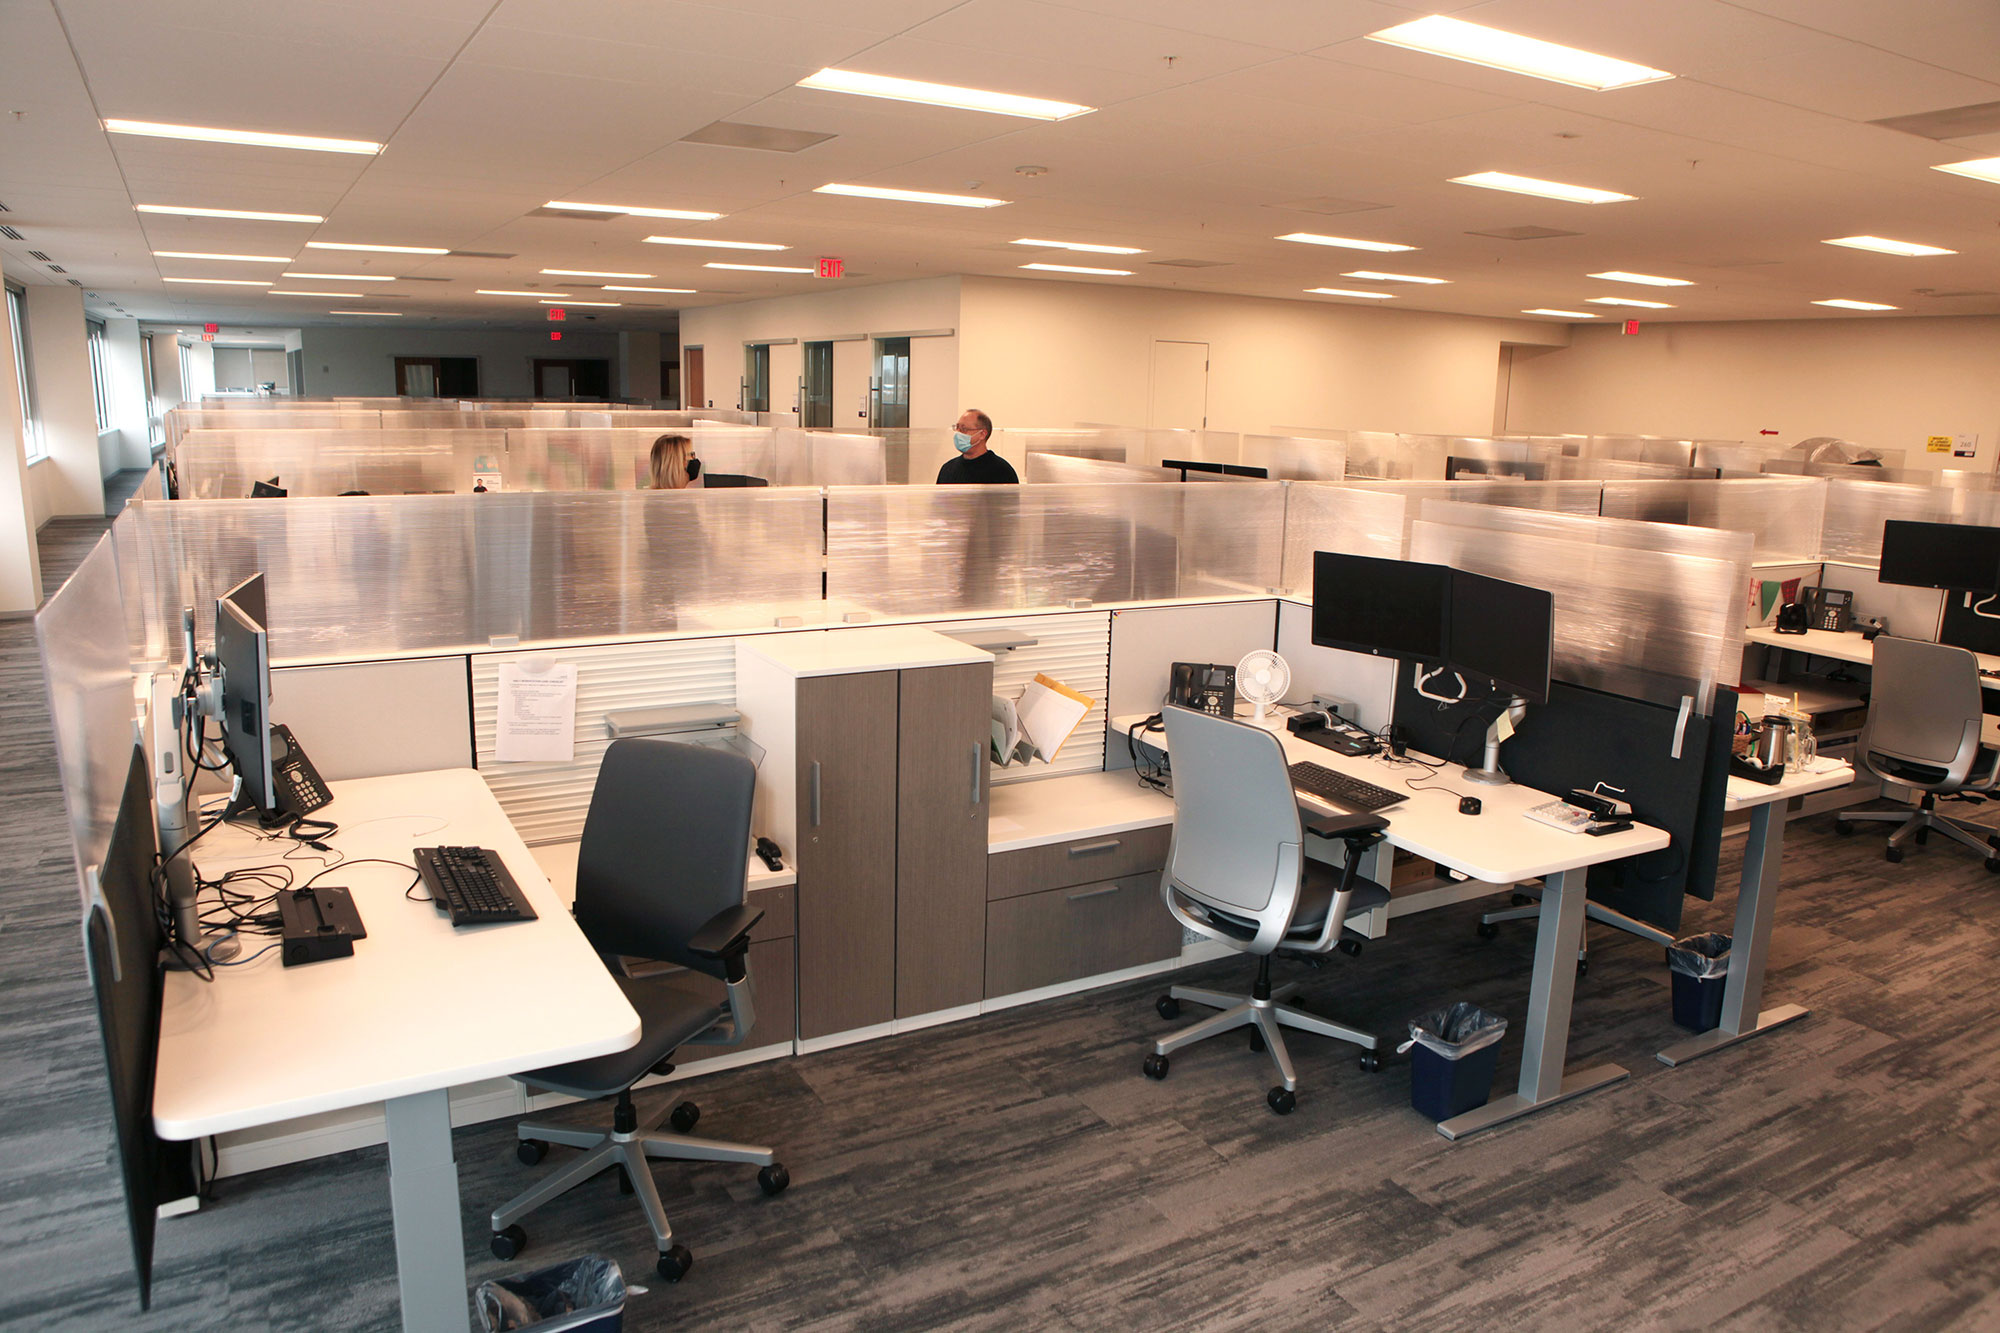 Overview of company cubicles